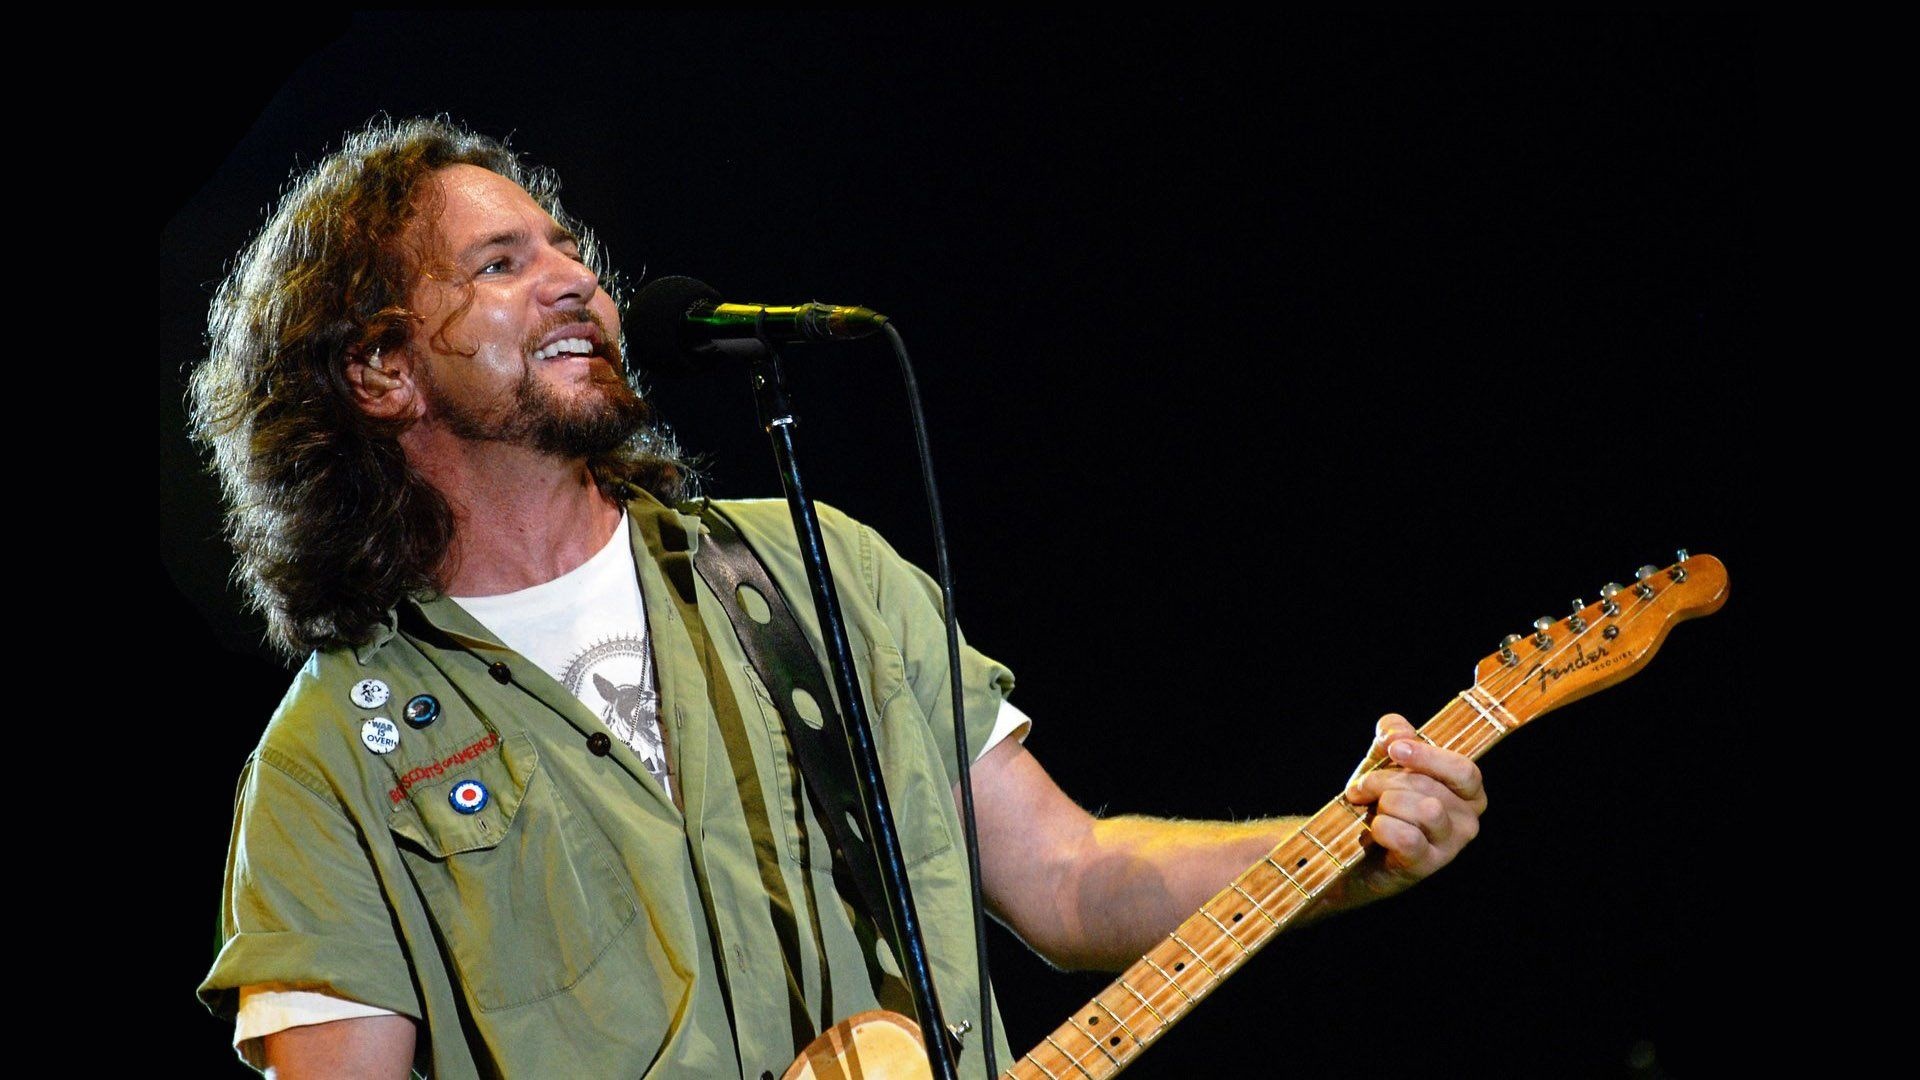 Eddie Vedder wallpapers, Iconic frontman, Musical inspiration, Captivating stage presence, 1920x1080 Full HD Desktop